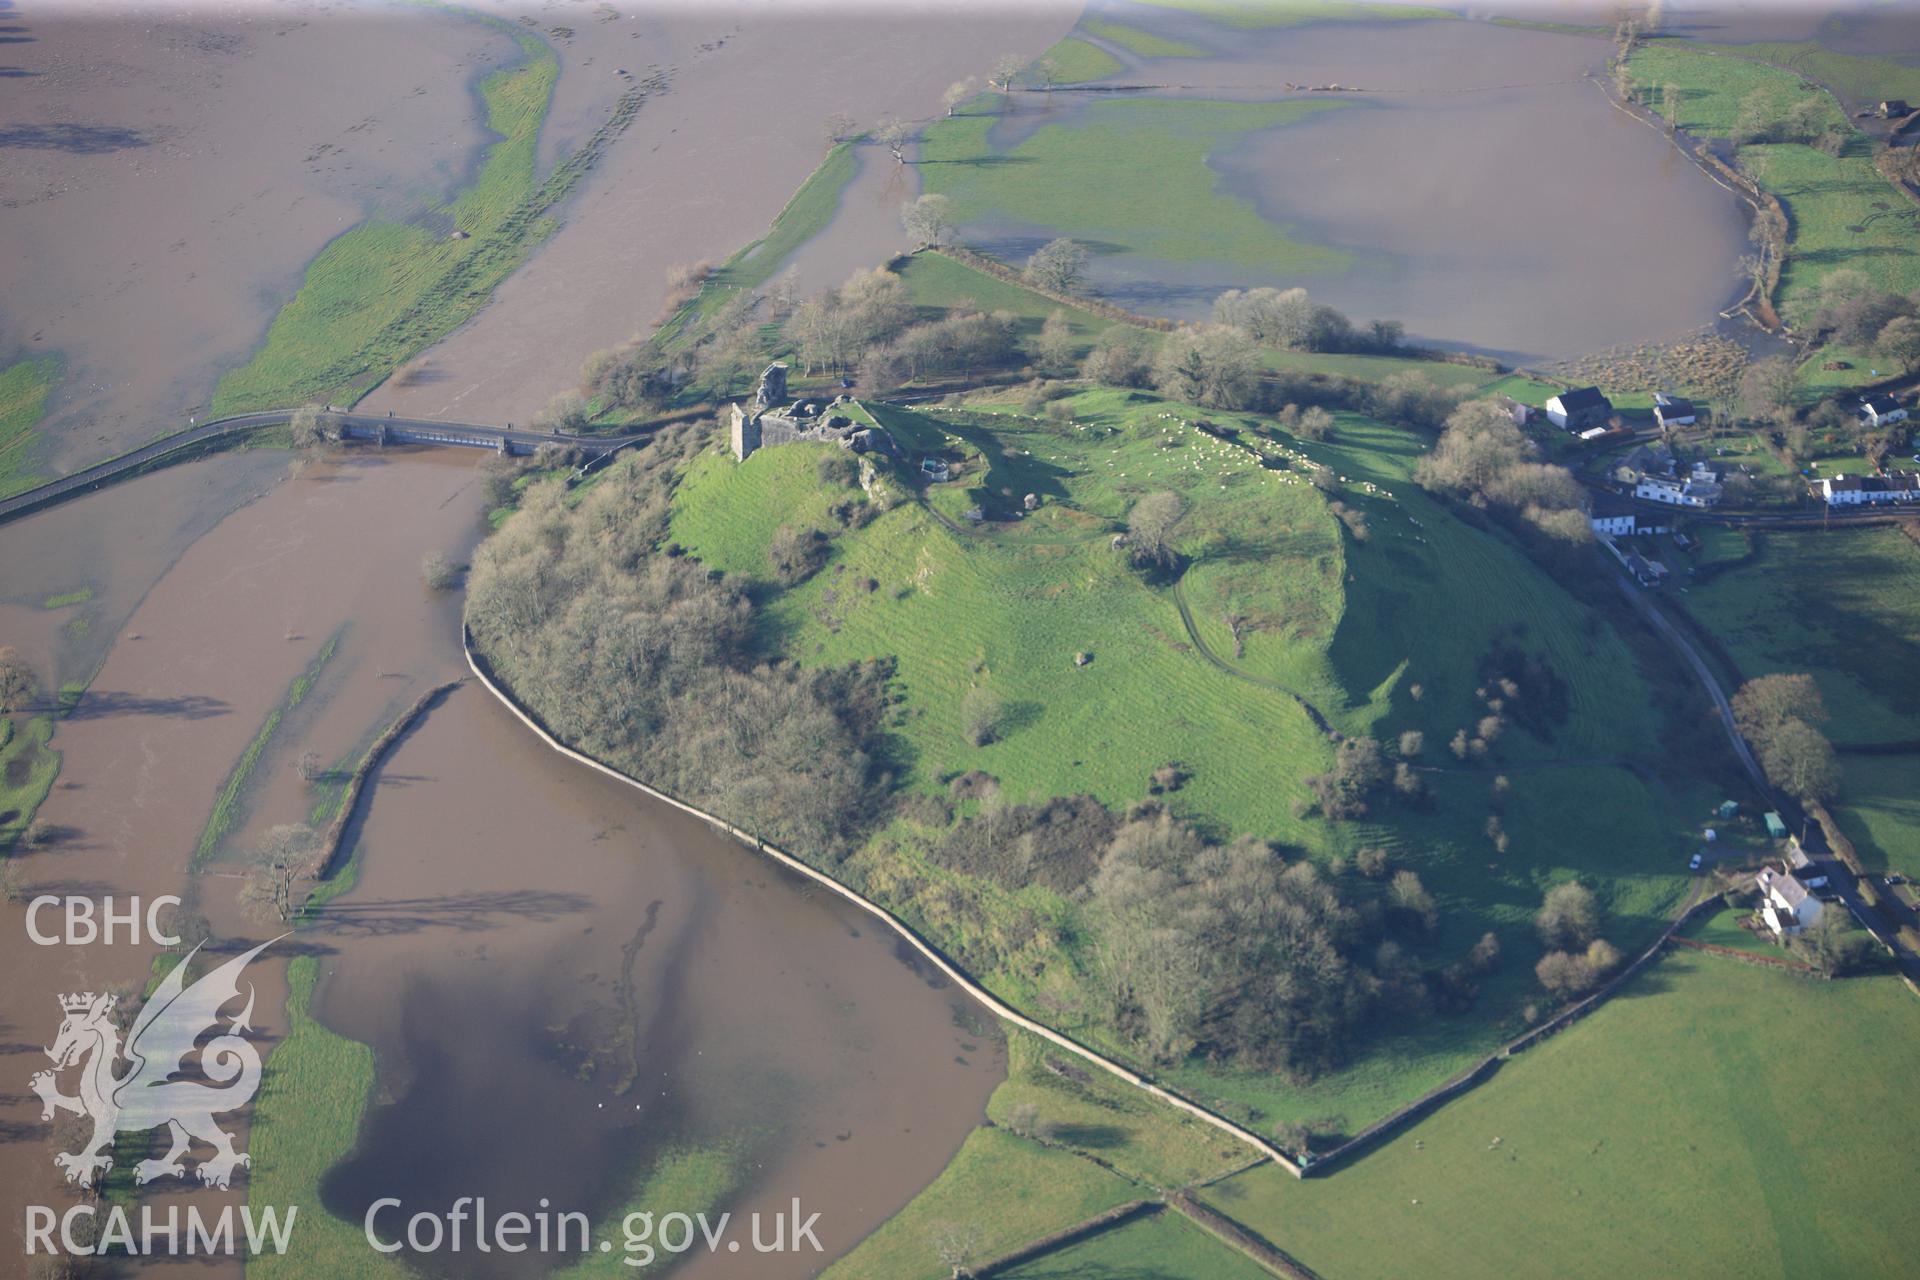 RCAHMW colour oblique photograph of Dryslwyn Castle, with flooding on the River Tywi, view from east. Taken by Toby Driver on 23/11/2012.